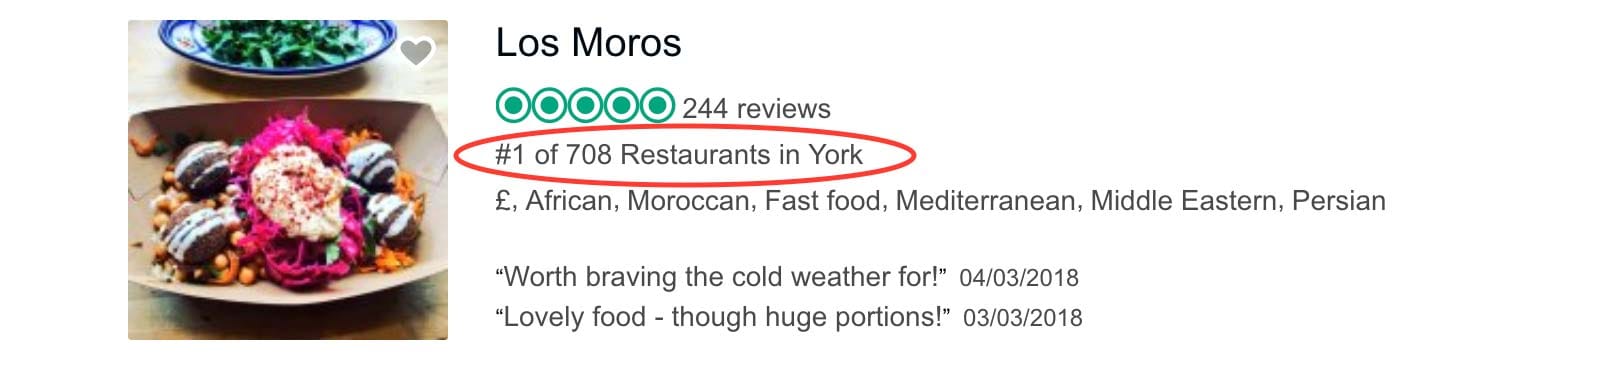 Los Moros' TripAdvisor ranking, showing a five bubble rating, 244 reviews, its #1 ranking in York, its price range, cuisine, and a couple of review snippets.